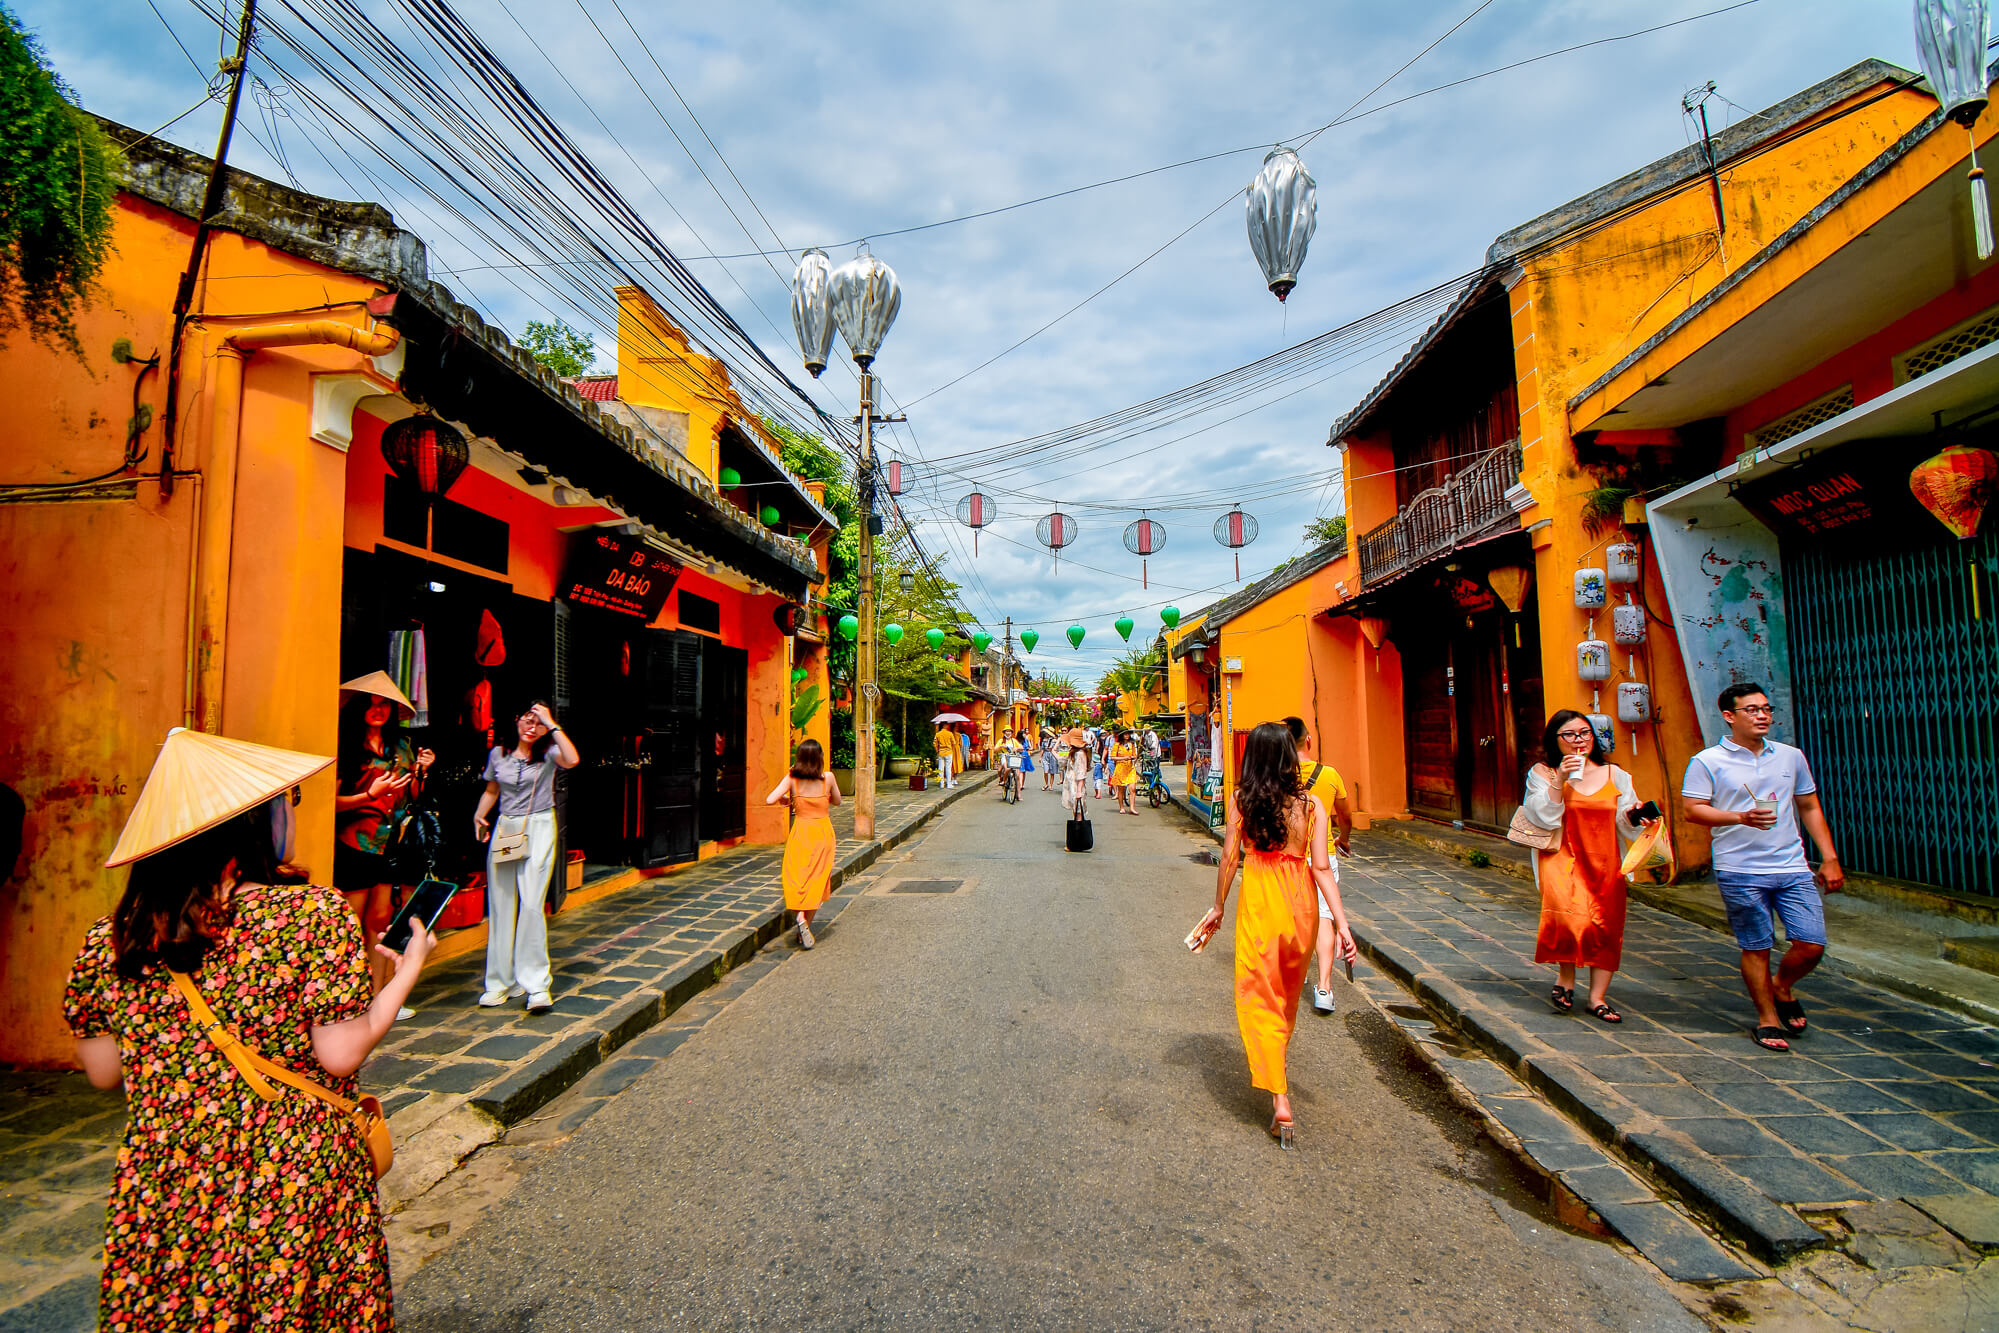 Streets in Hoi An ancient town are safe for walking